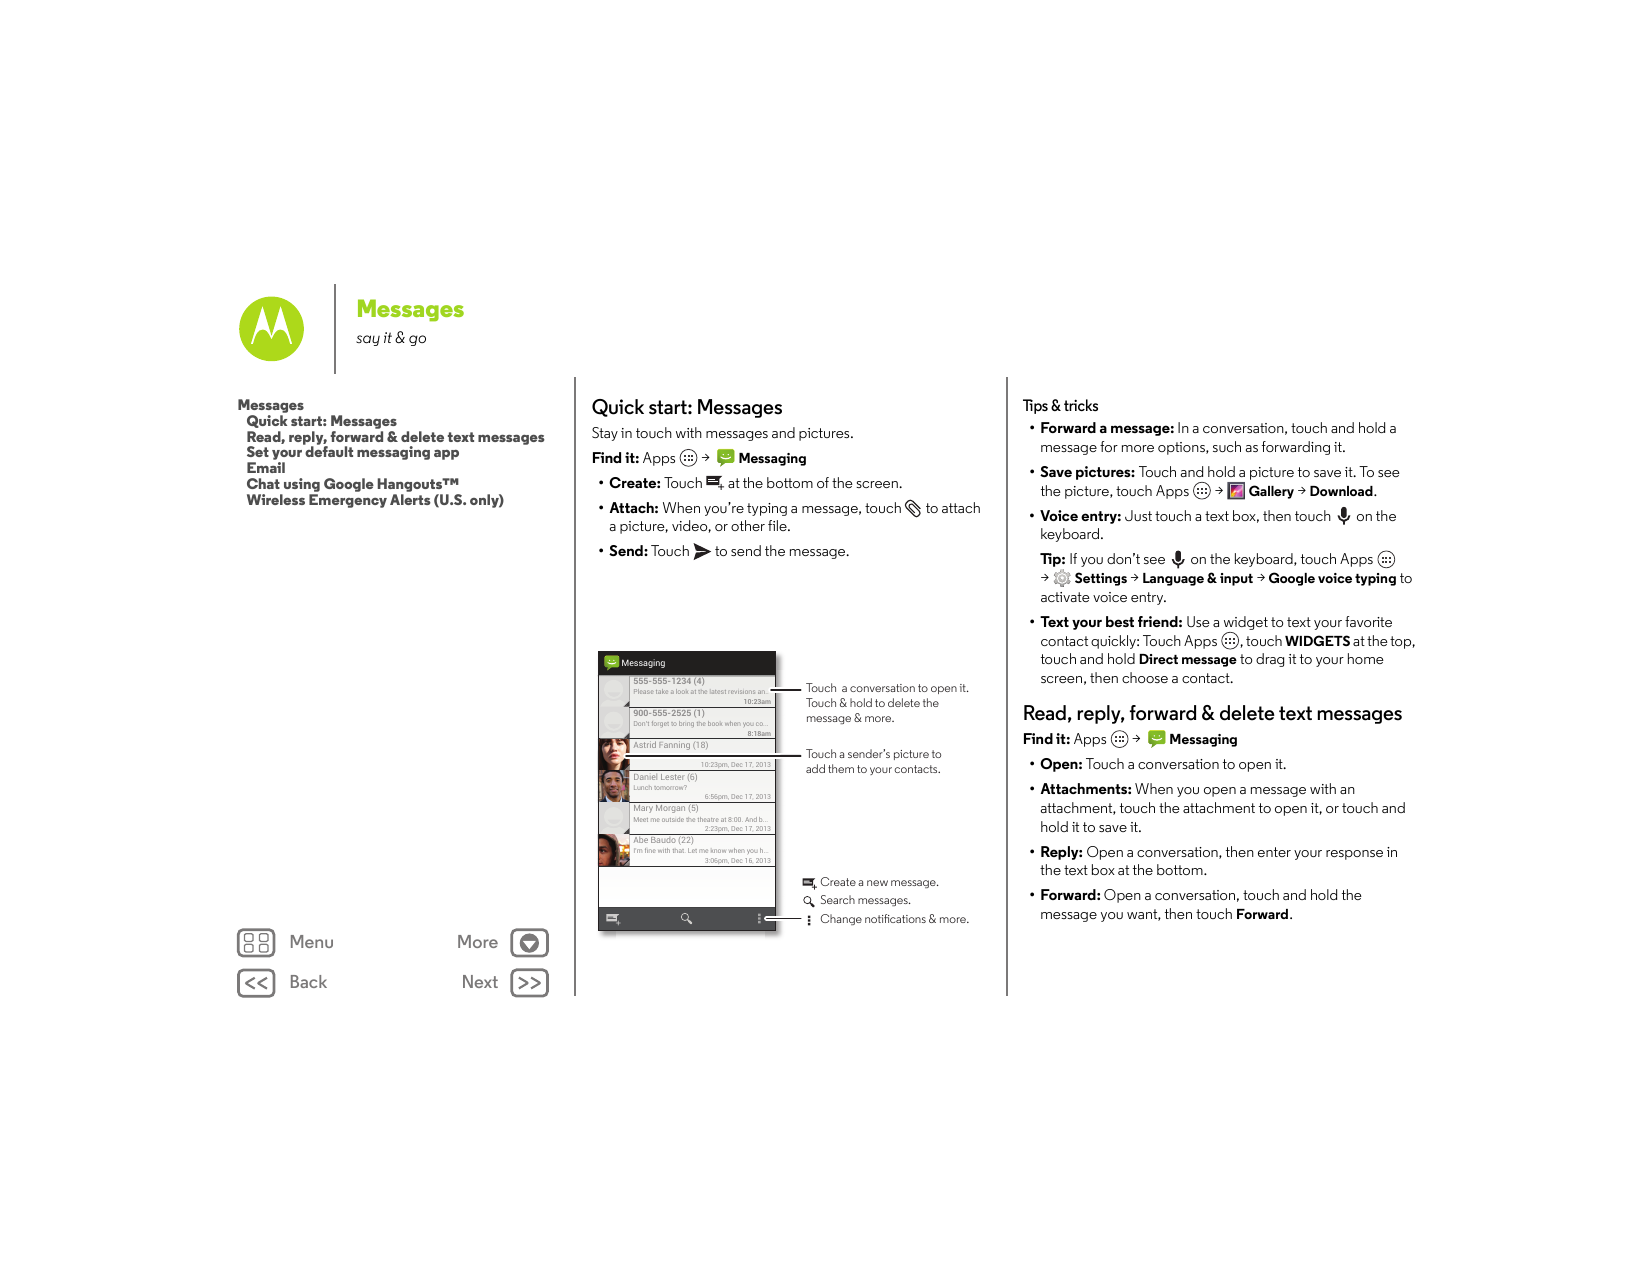 Messagessay it & goMessagesQuick start: MessagesRead, reply, forward & delete text messagesSet your default messaging appEmailCh